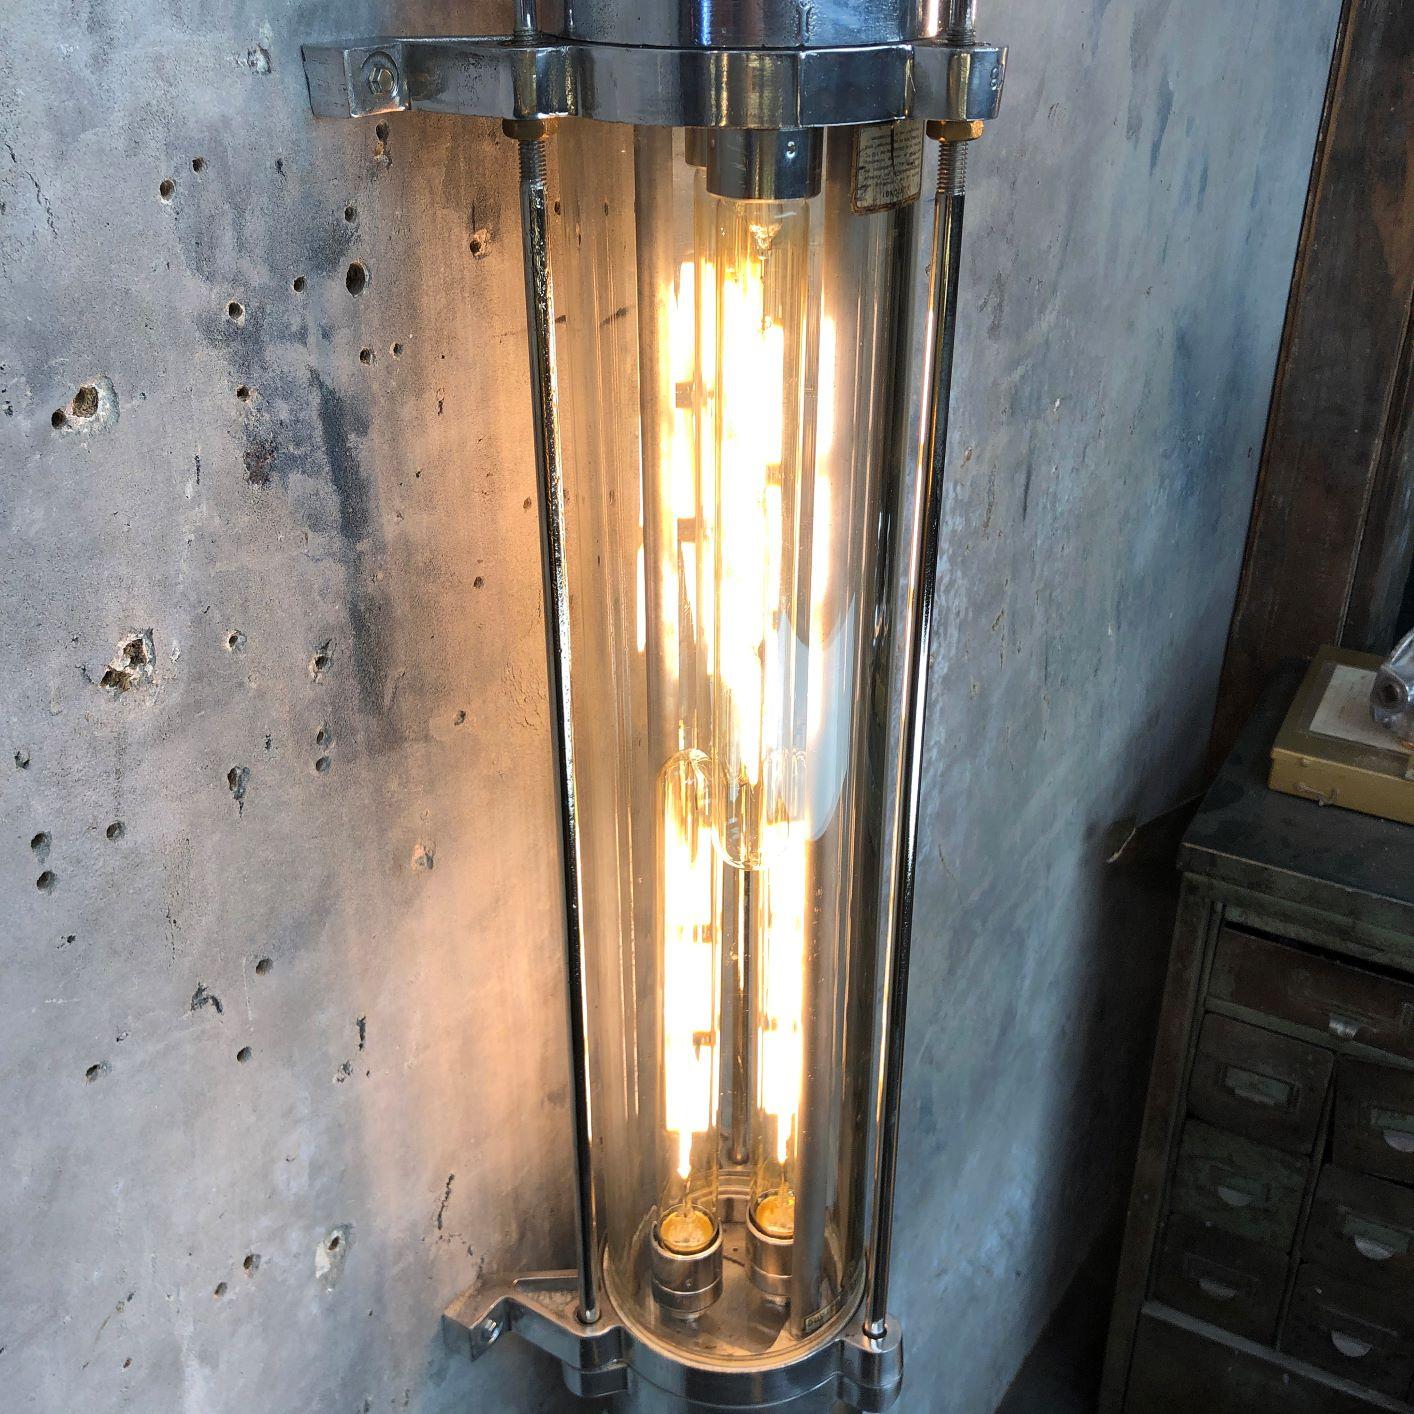 1970s German Wall Mounted Aluminium and Glass Explosion Proof Edison Tube Light 1